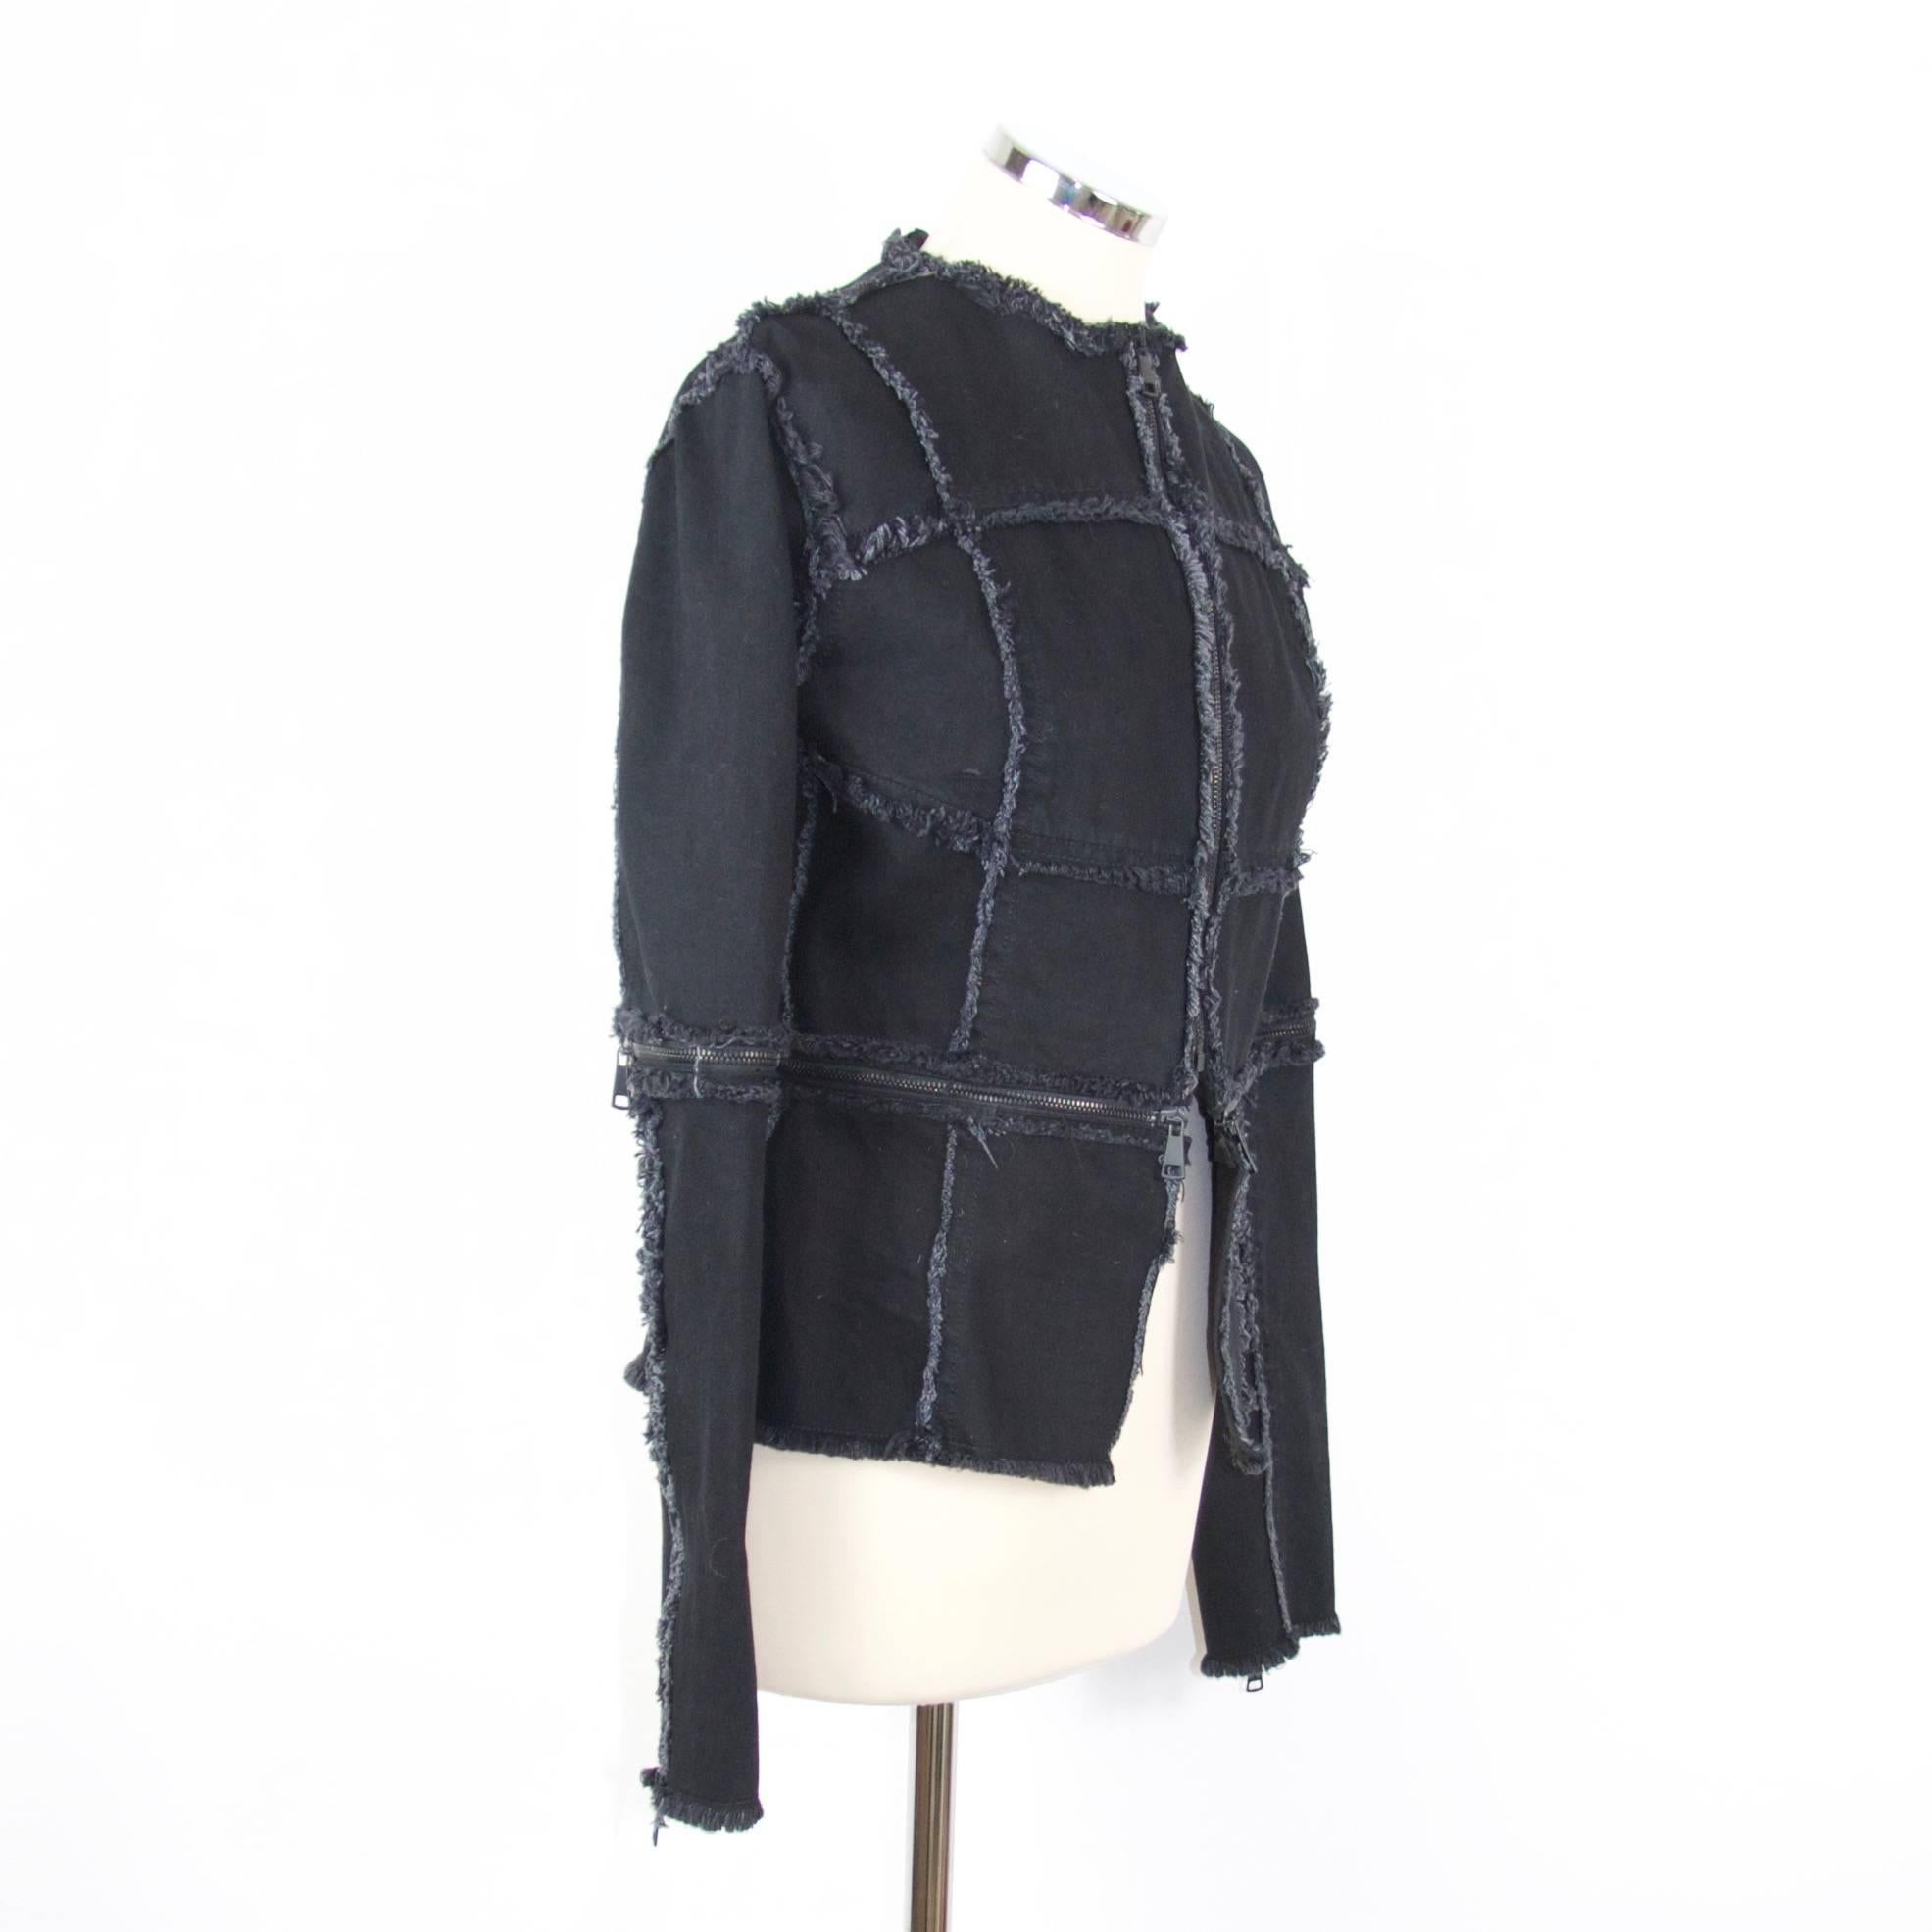 Christopher Kane

Black cotton drill panel jacket with zip detail. 